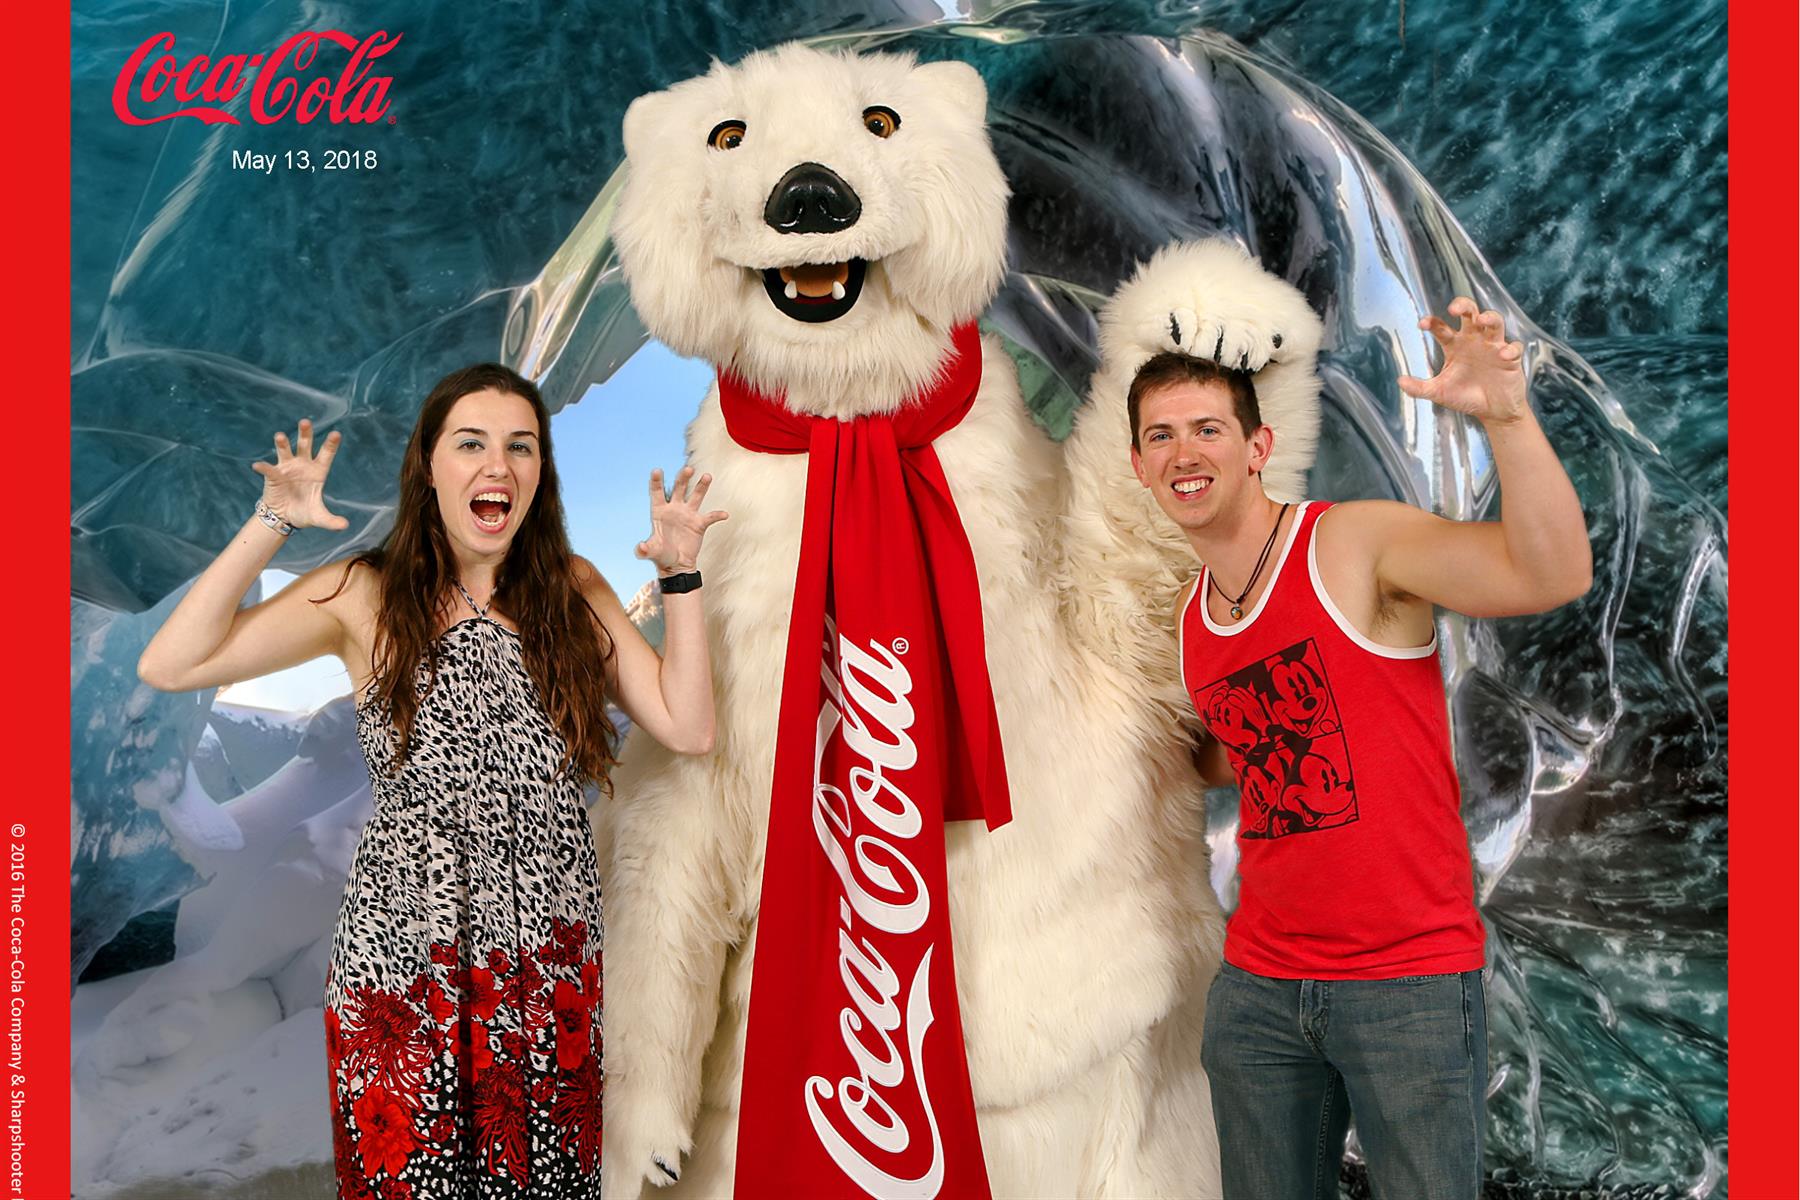 Chelsea and Robby with the Coca Cola Bear.